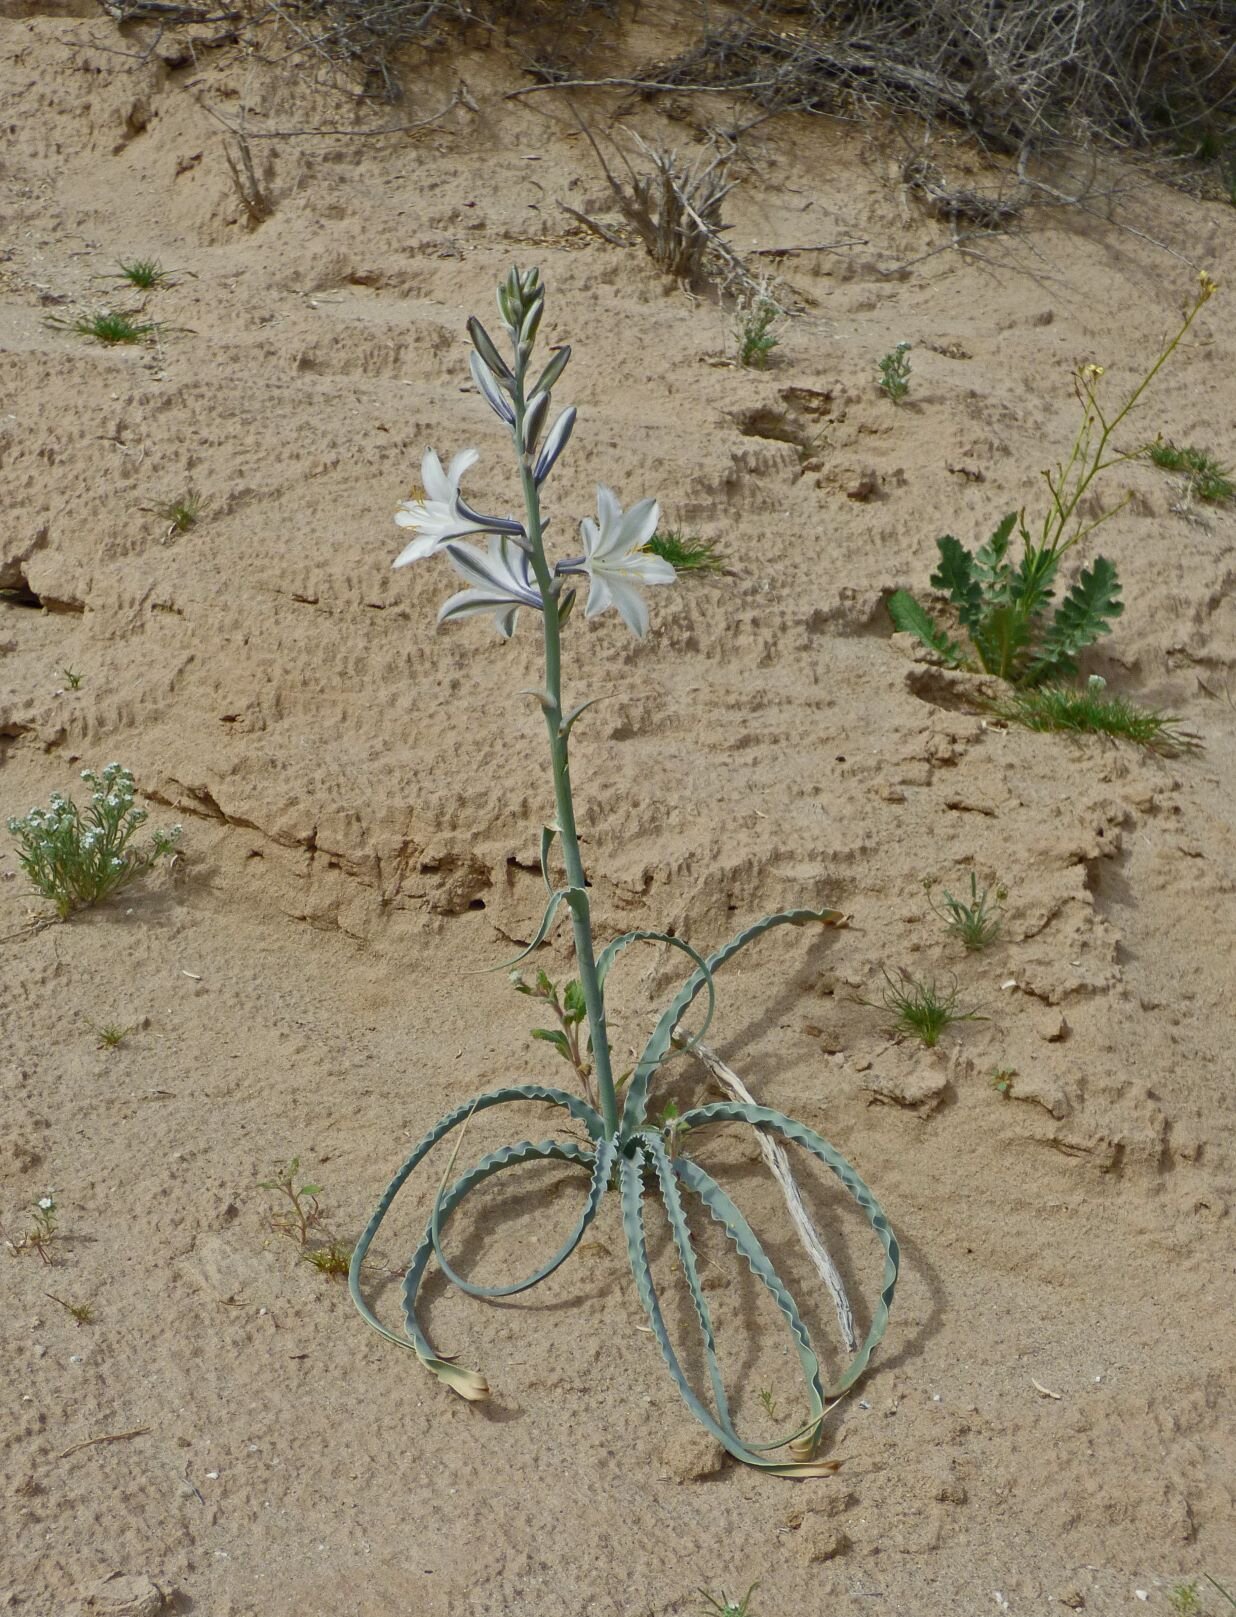 And of course, no spring trip to the desert without at least a few Desert Lilies